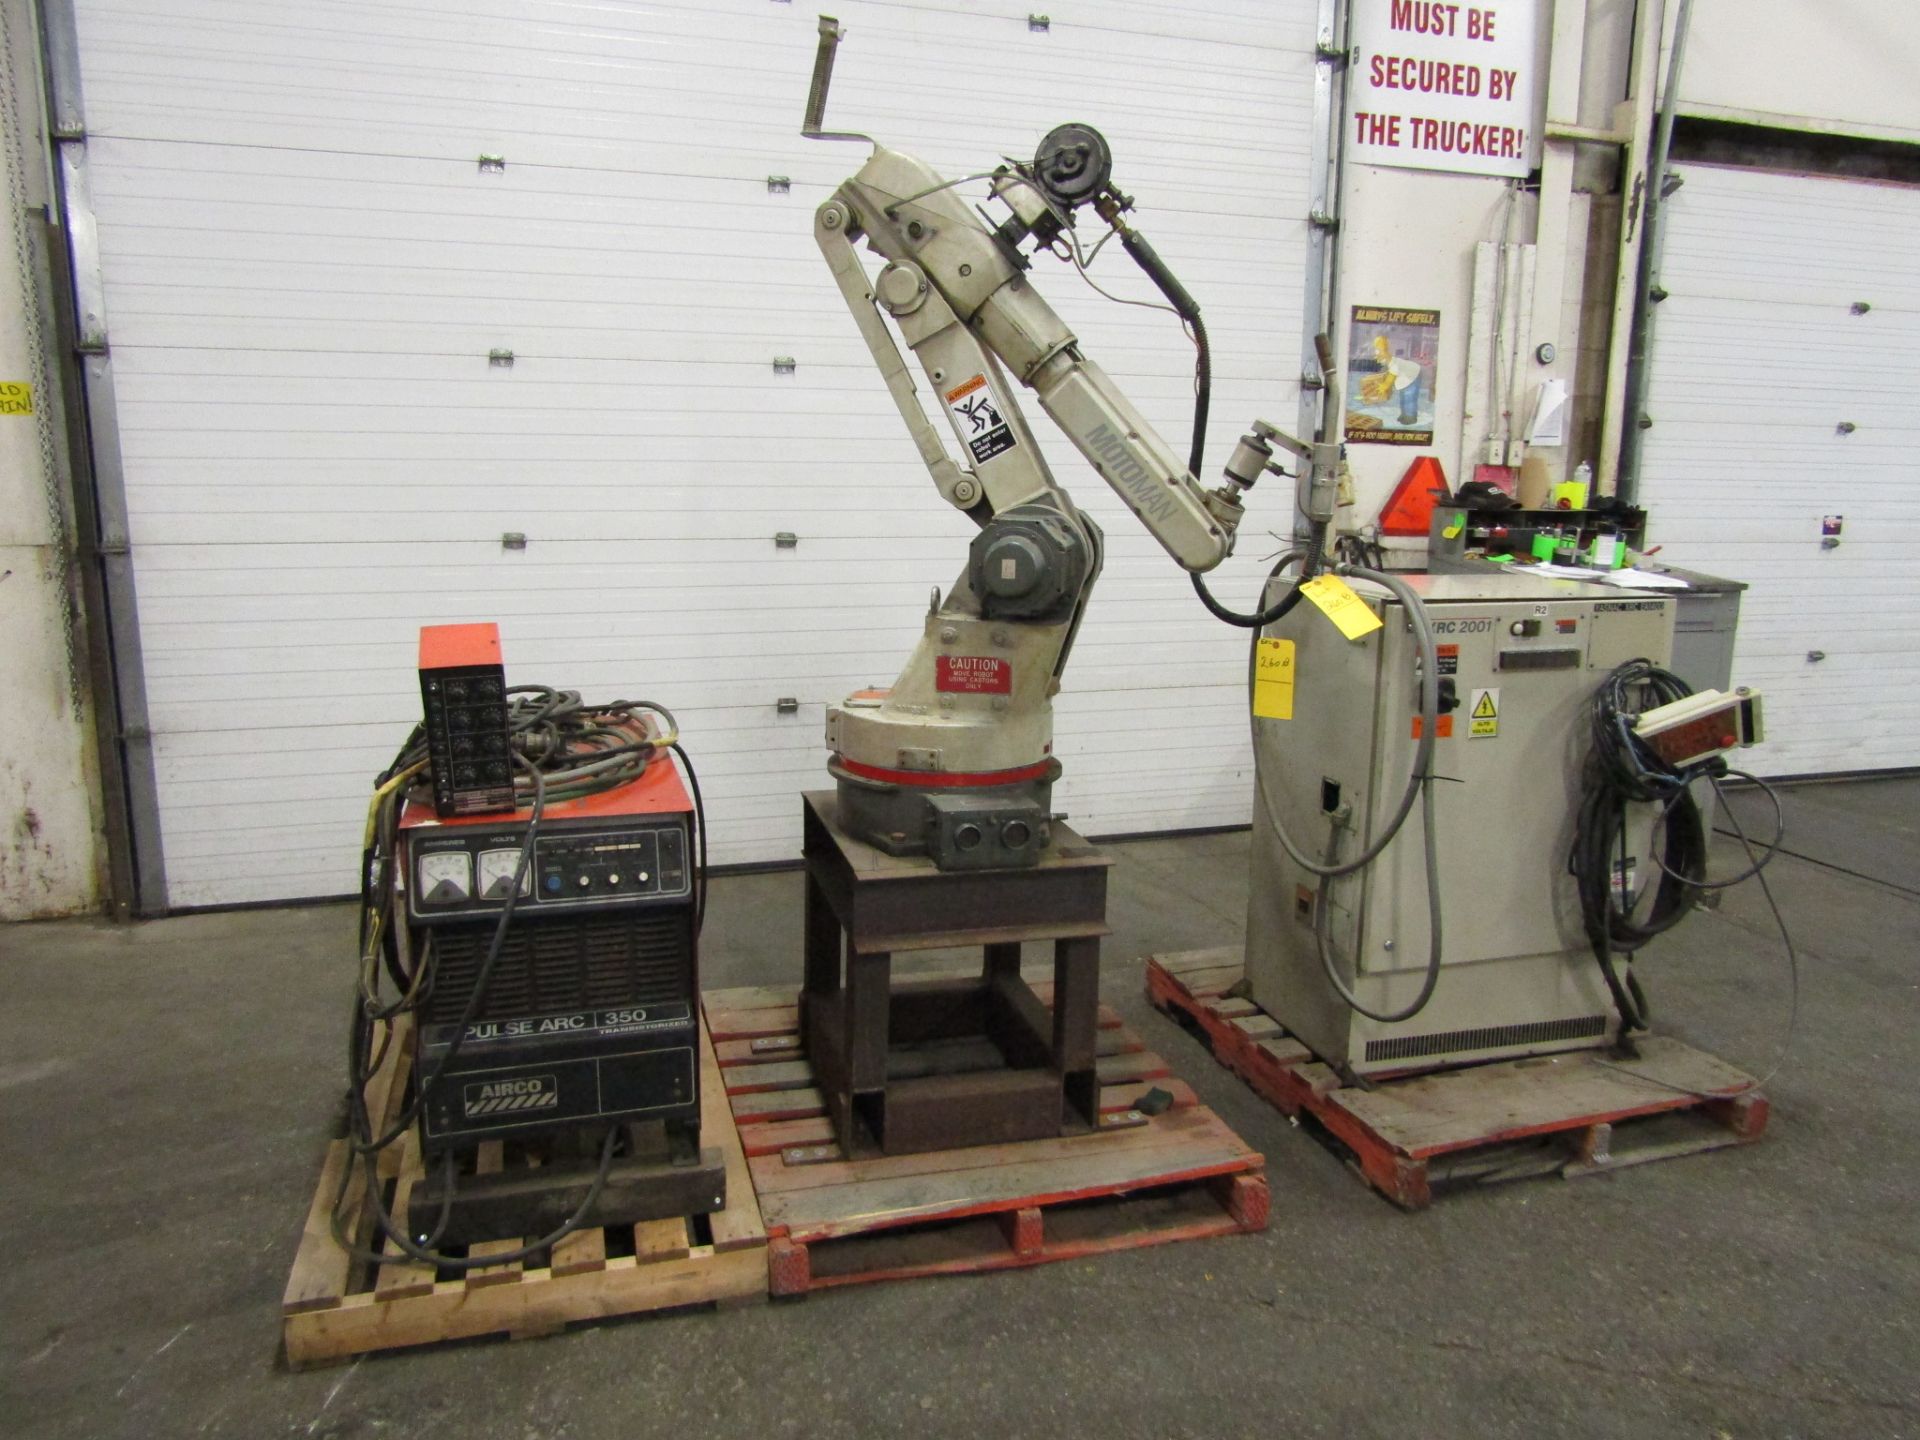 2004 Motoman UP6 Welding Robot System with XRC 2001 controller with teach pendant & Airco 350 Amp